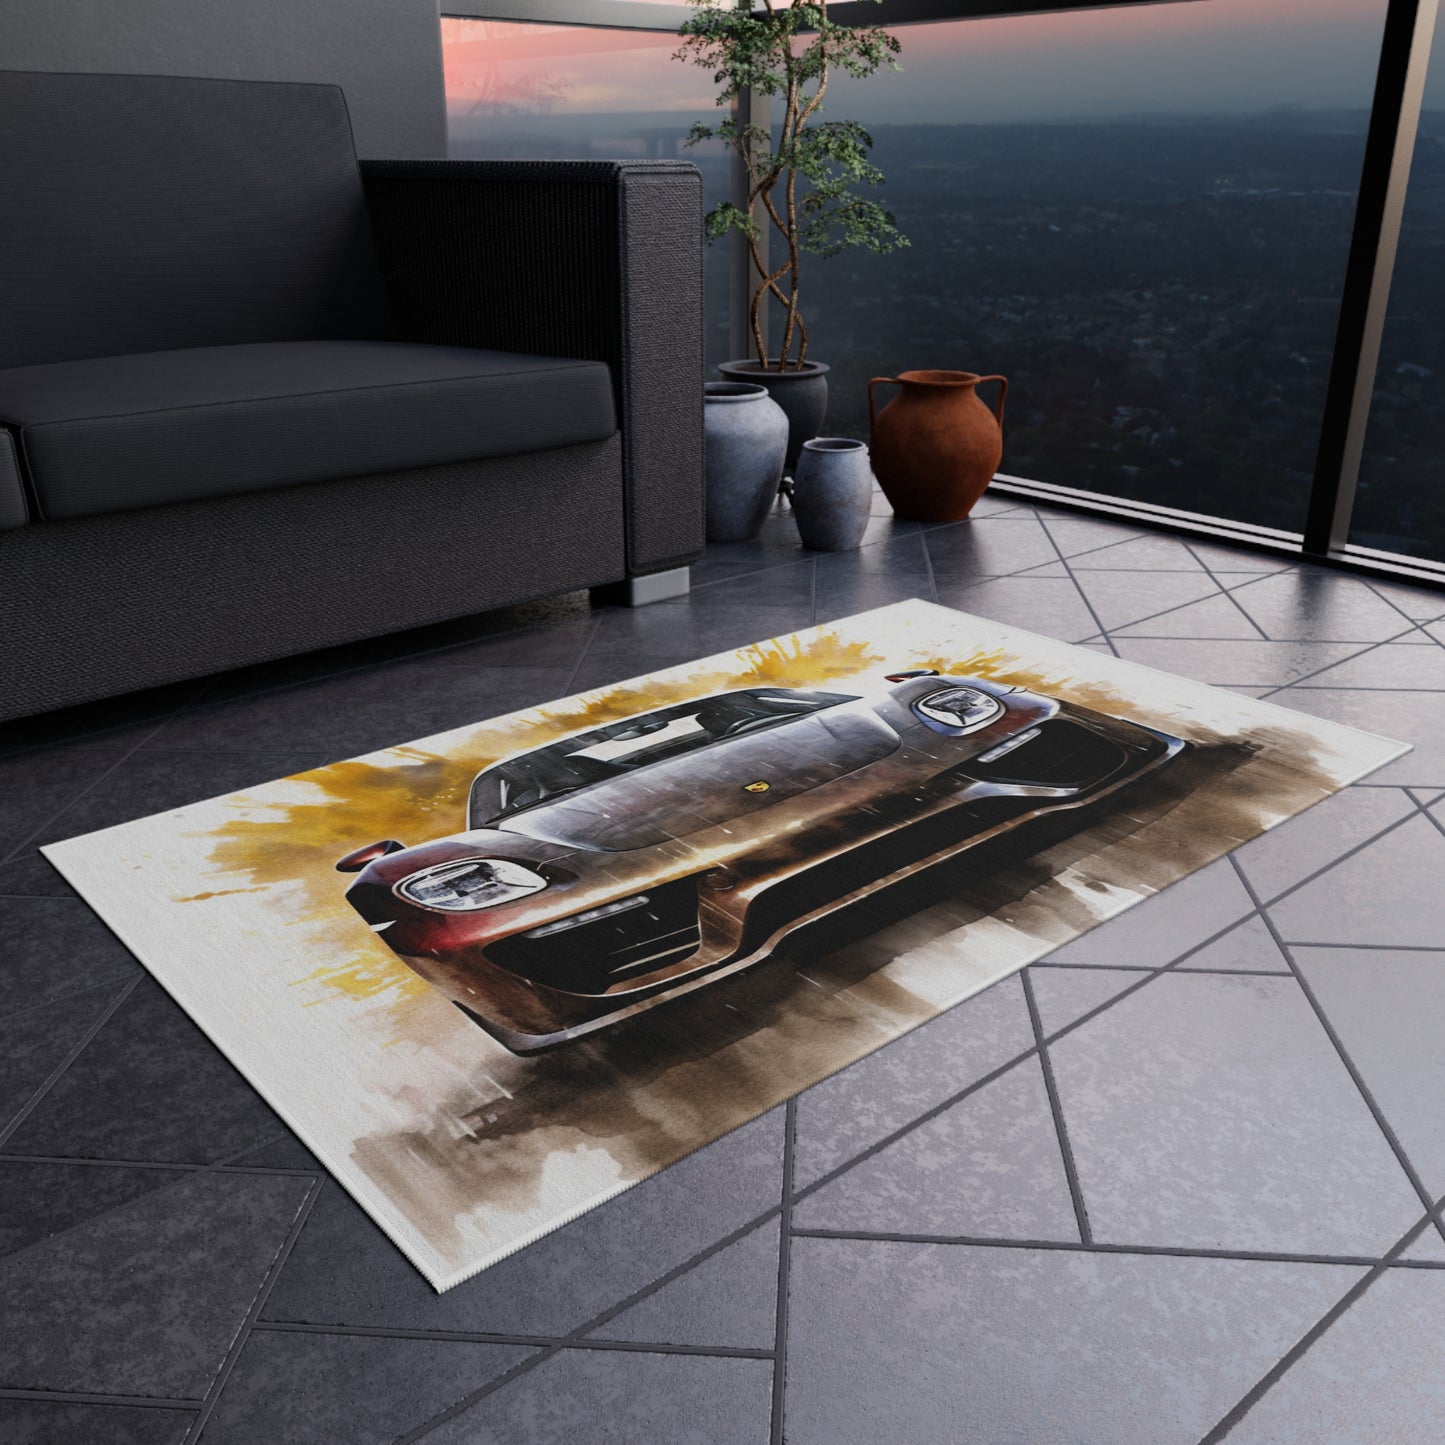 Outdoor Rug  918 Spyder white background driving fast with water splashing 1